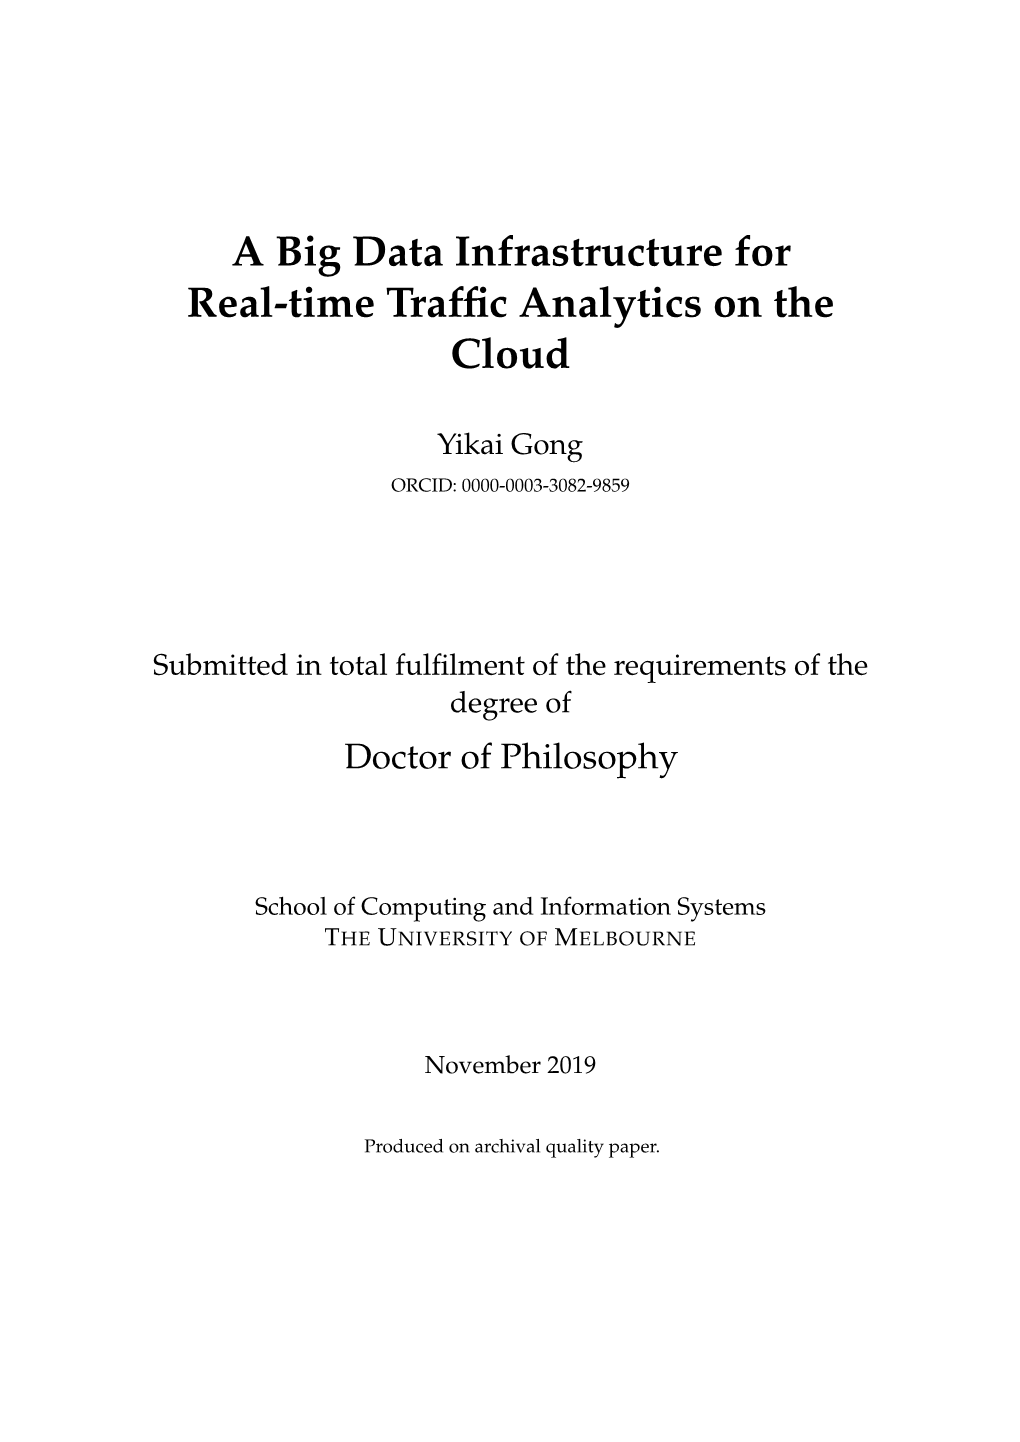 A Big Data Infrastructure for Real-Time Traffic Analytics on the Cloud